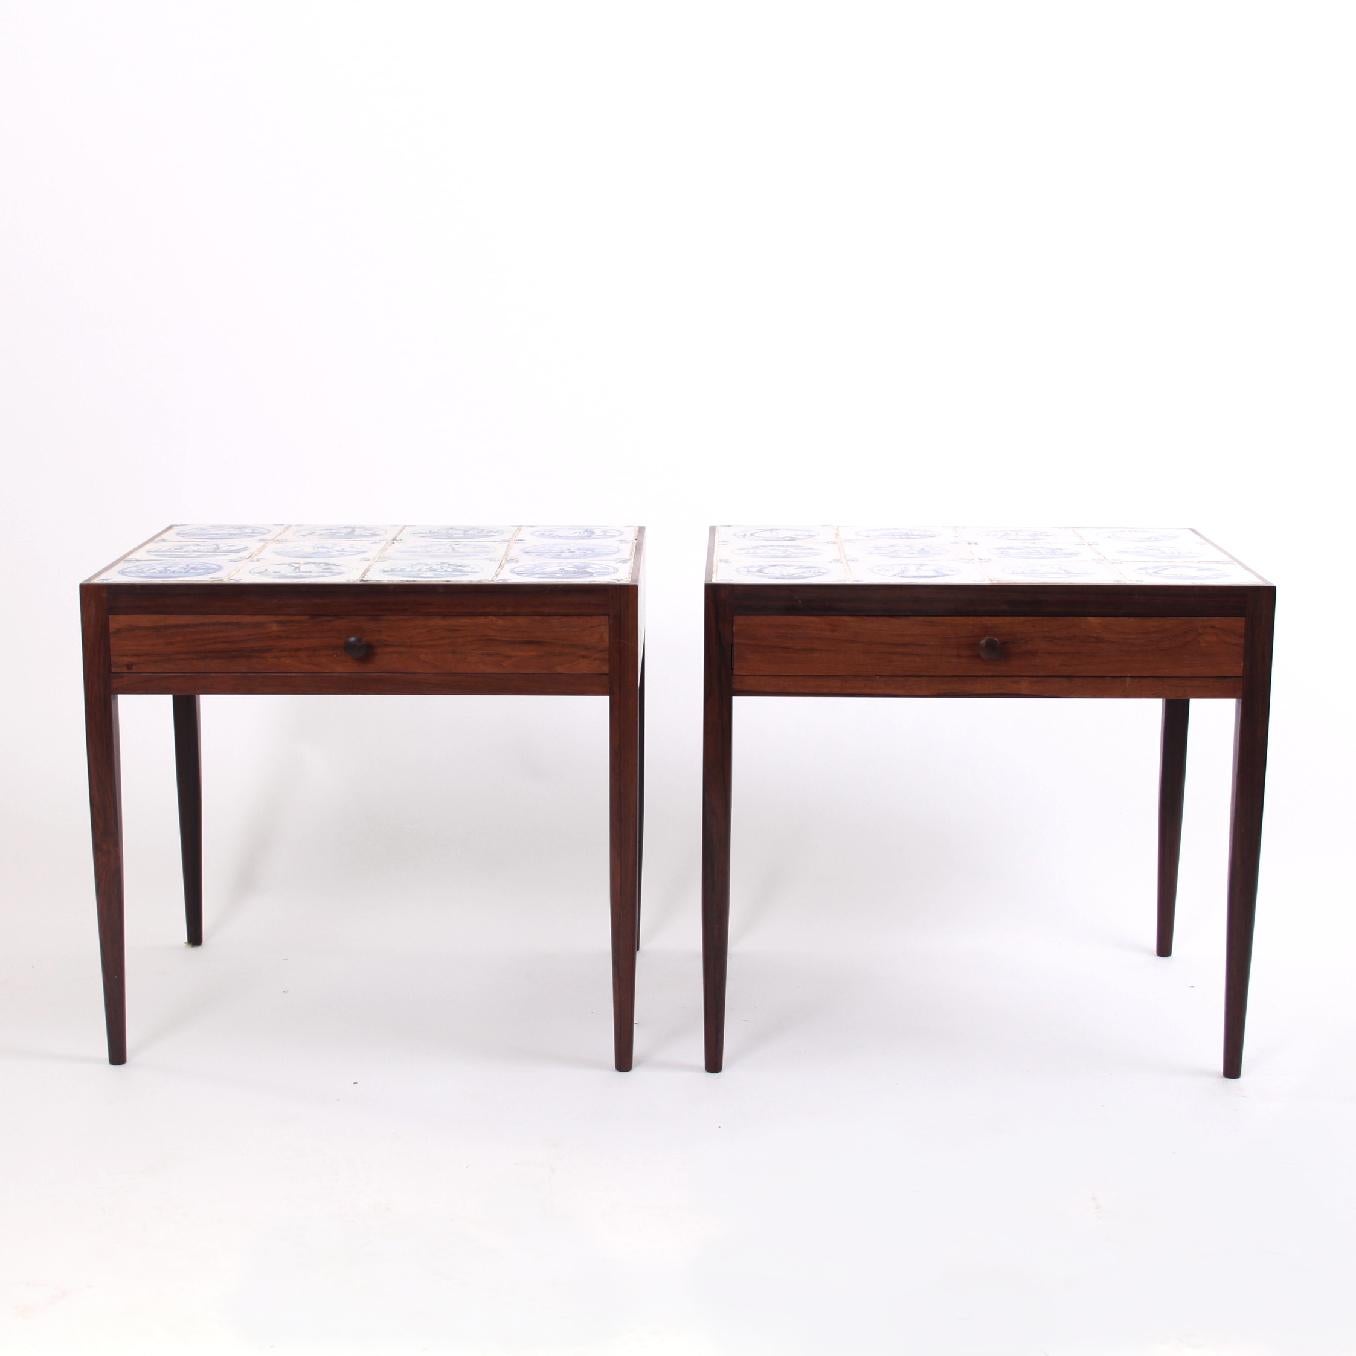 Niels Vodder-Scandinavian modern. 

The close companion of Finn Juhl, Niels Vodder, is the designer and cabinetmaker of these beautiful and rare side tables in rosewood and antique Delft tiles. The mixture of classic tiles and high-grade